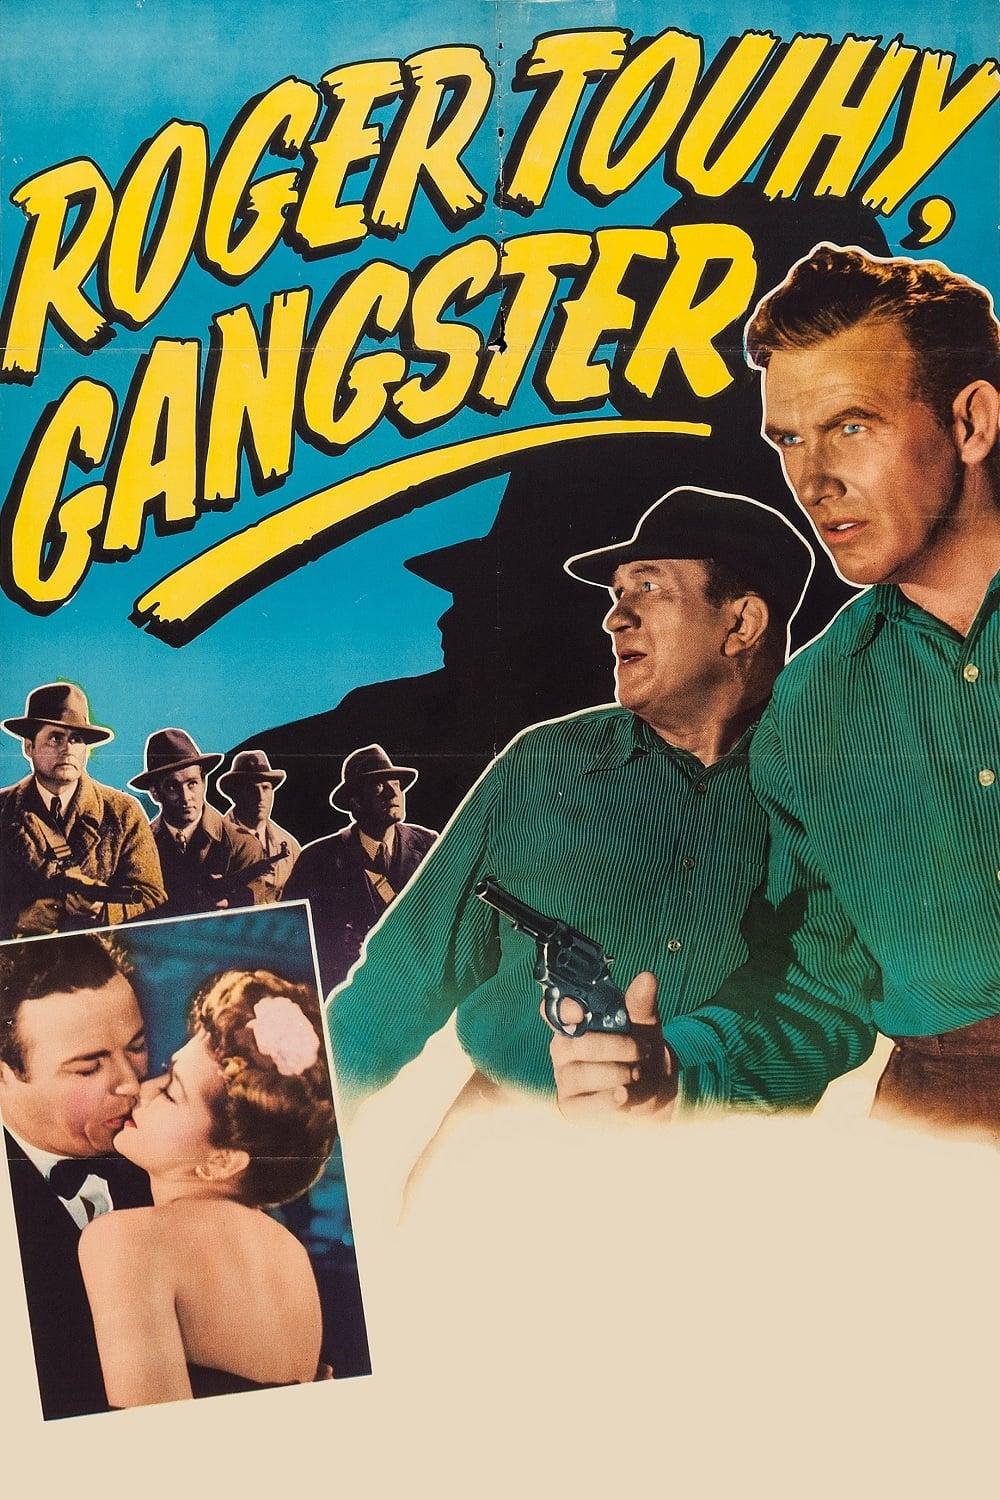 Roger Touhy, Gangster poster